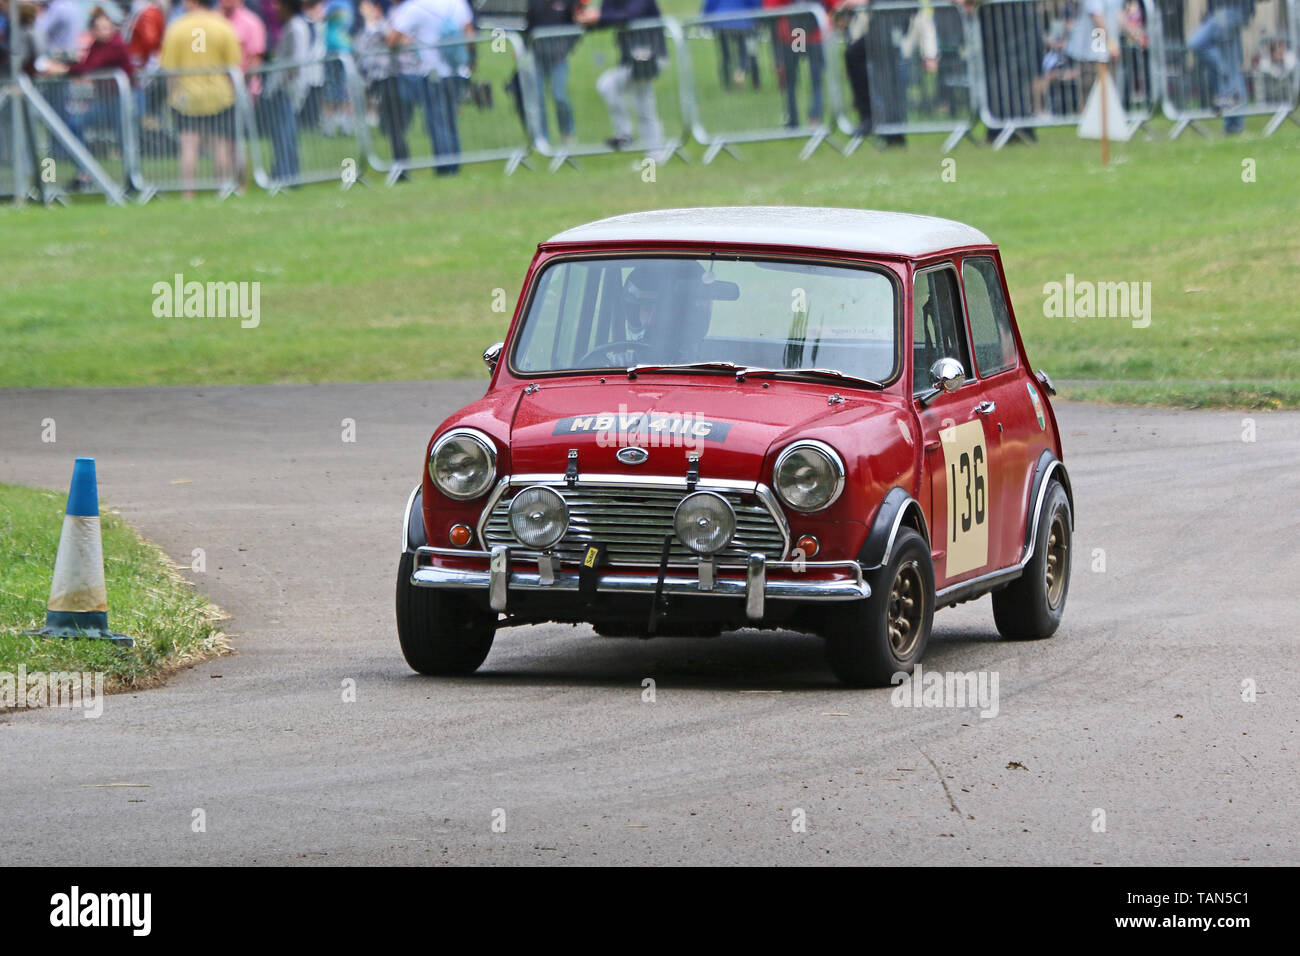 Mini Cooper, Motorsport at the Palace, Crystal Palace Race Circuit, London, UK, 26 May 2019, Photo by Richard Goldschmidt Stock Photo